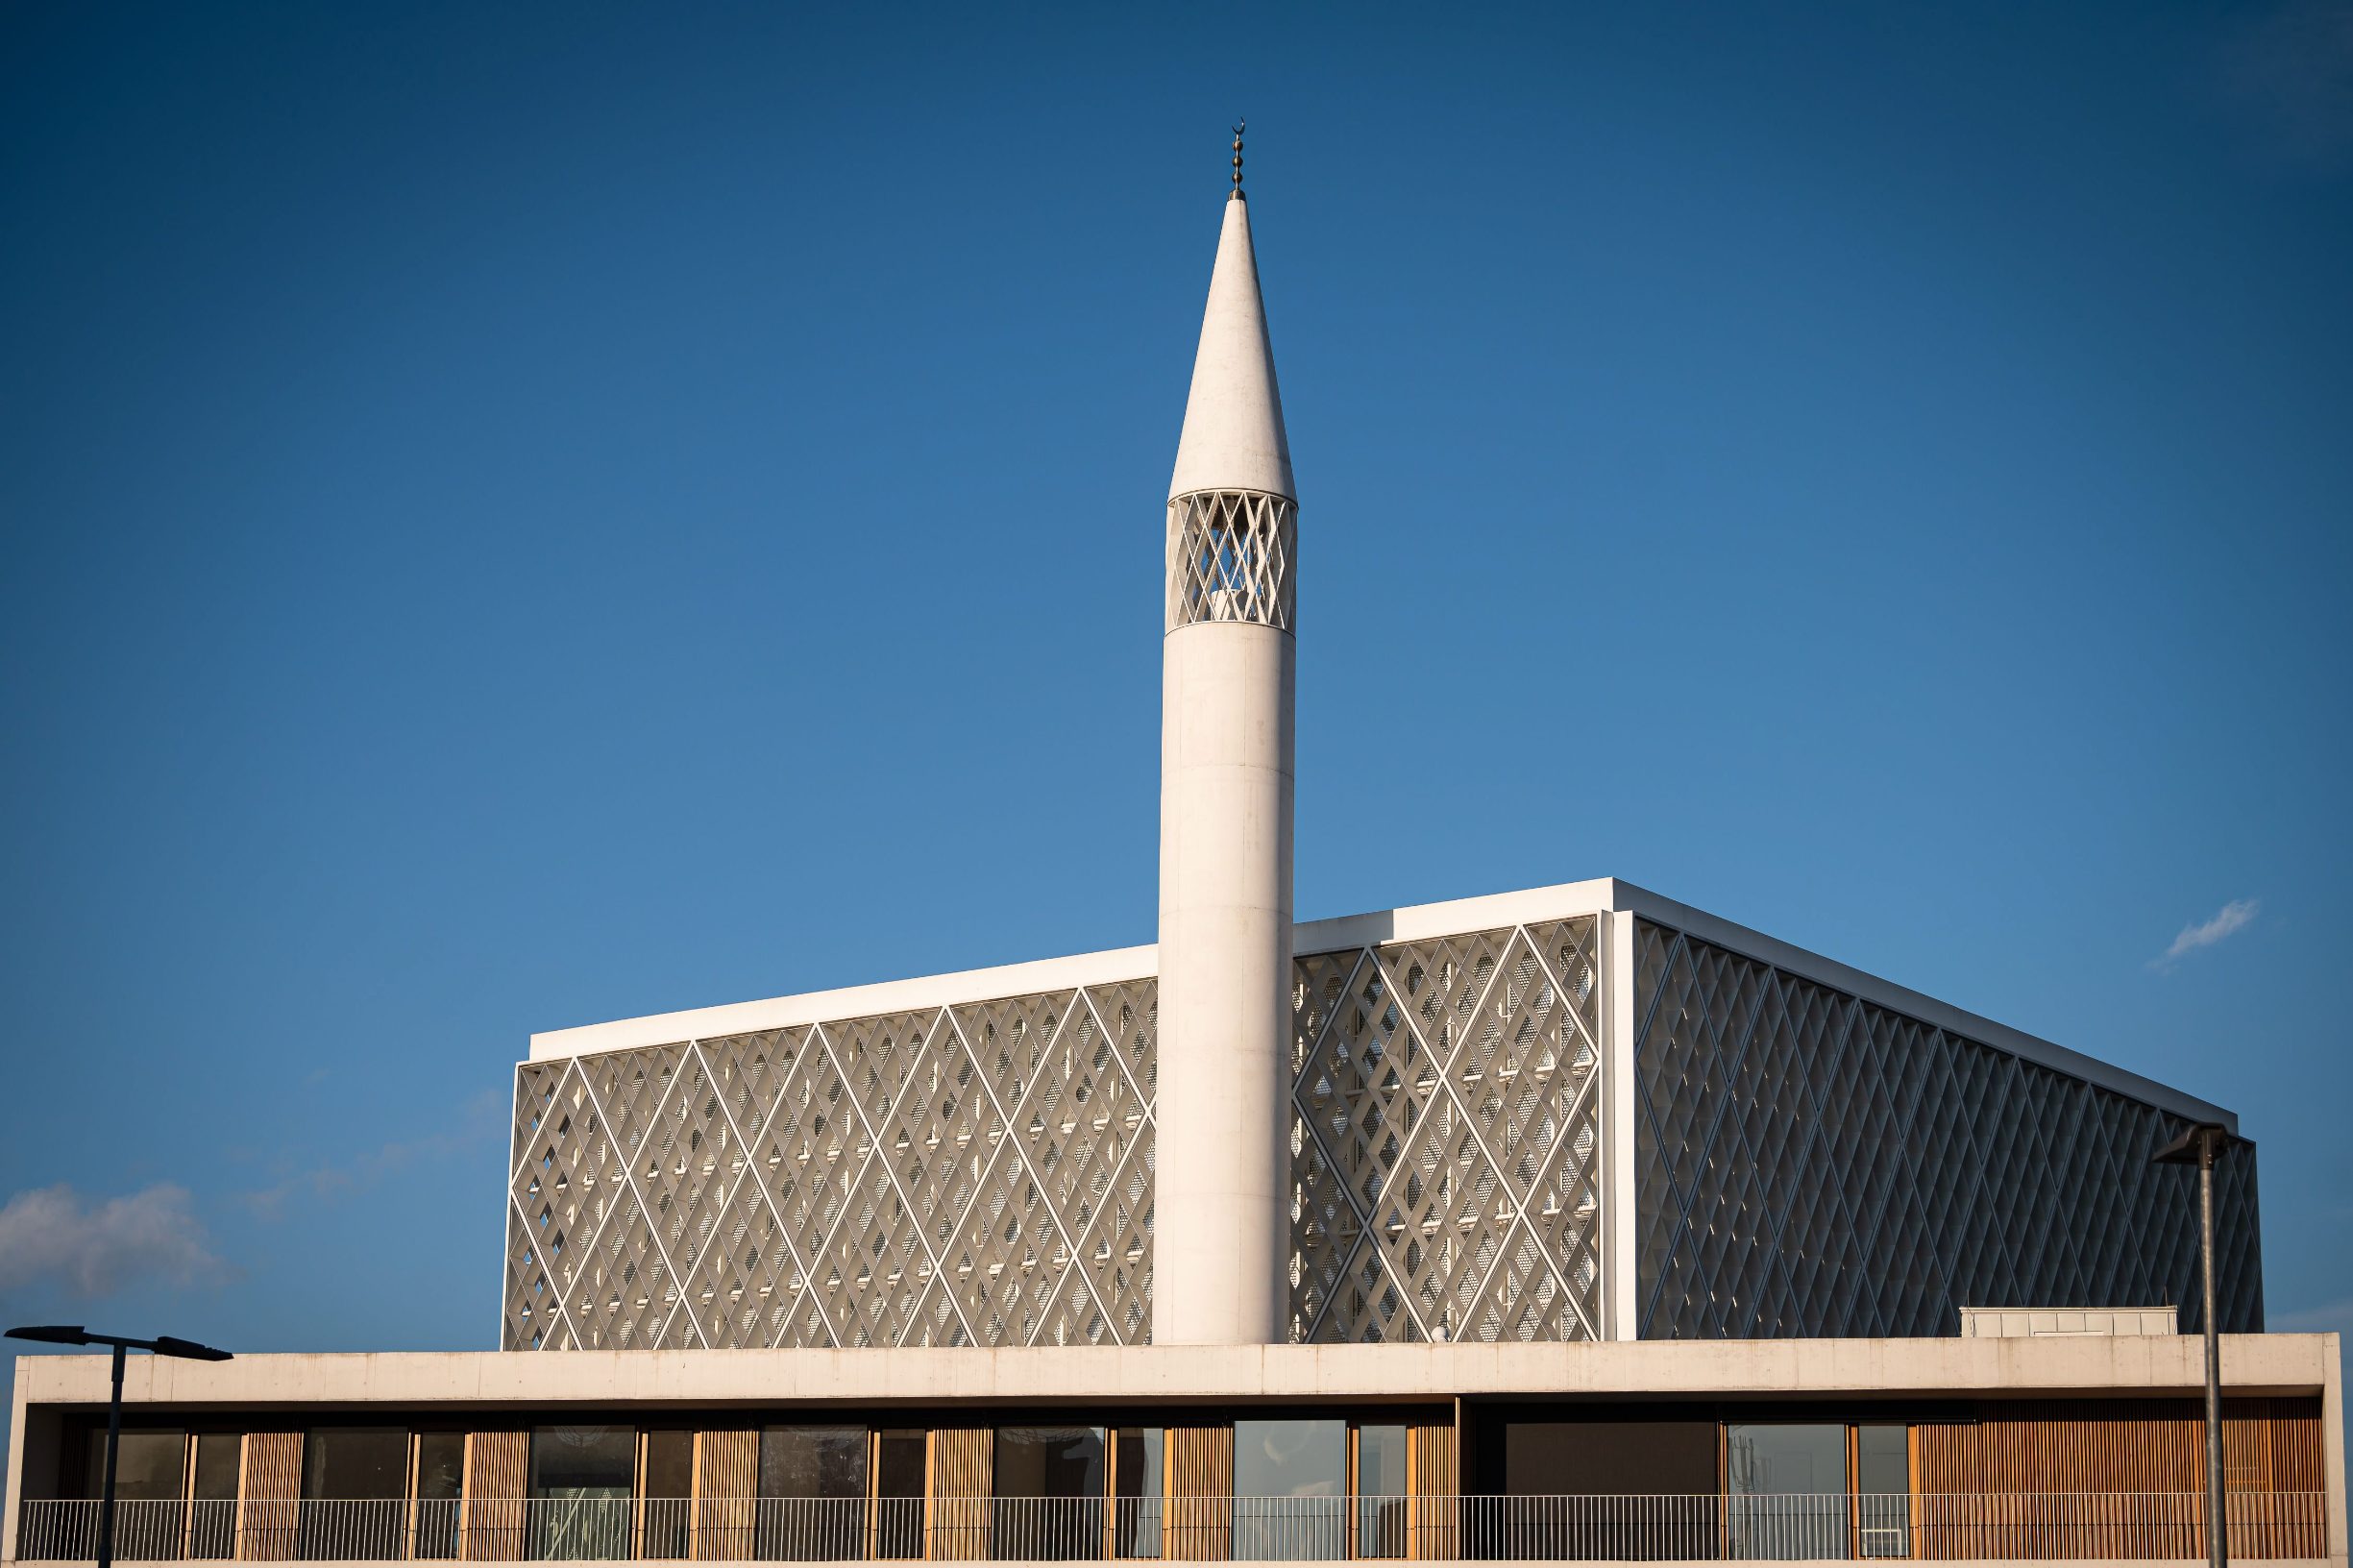 A taken on on January 29, 2020, shows the minaret of Slovenia's first mosque in Ljubljana. - Slovenia's first mosque opened its doors in the capital Ljubljana on February 3, more than 50 years after the initial request to build it was made. Muslims in the predominantly Catholic Alpine country first filed a request to build a mosque in the late 1960s while Slovenia was still part of the former Communist Yugoslavia. The community received permission 15 years ago, but ran into opposition from right-wing politicians and groups, as well as financial troubles. (Photo by Jure Makovec / AFP)